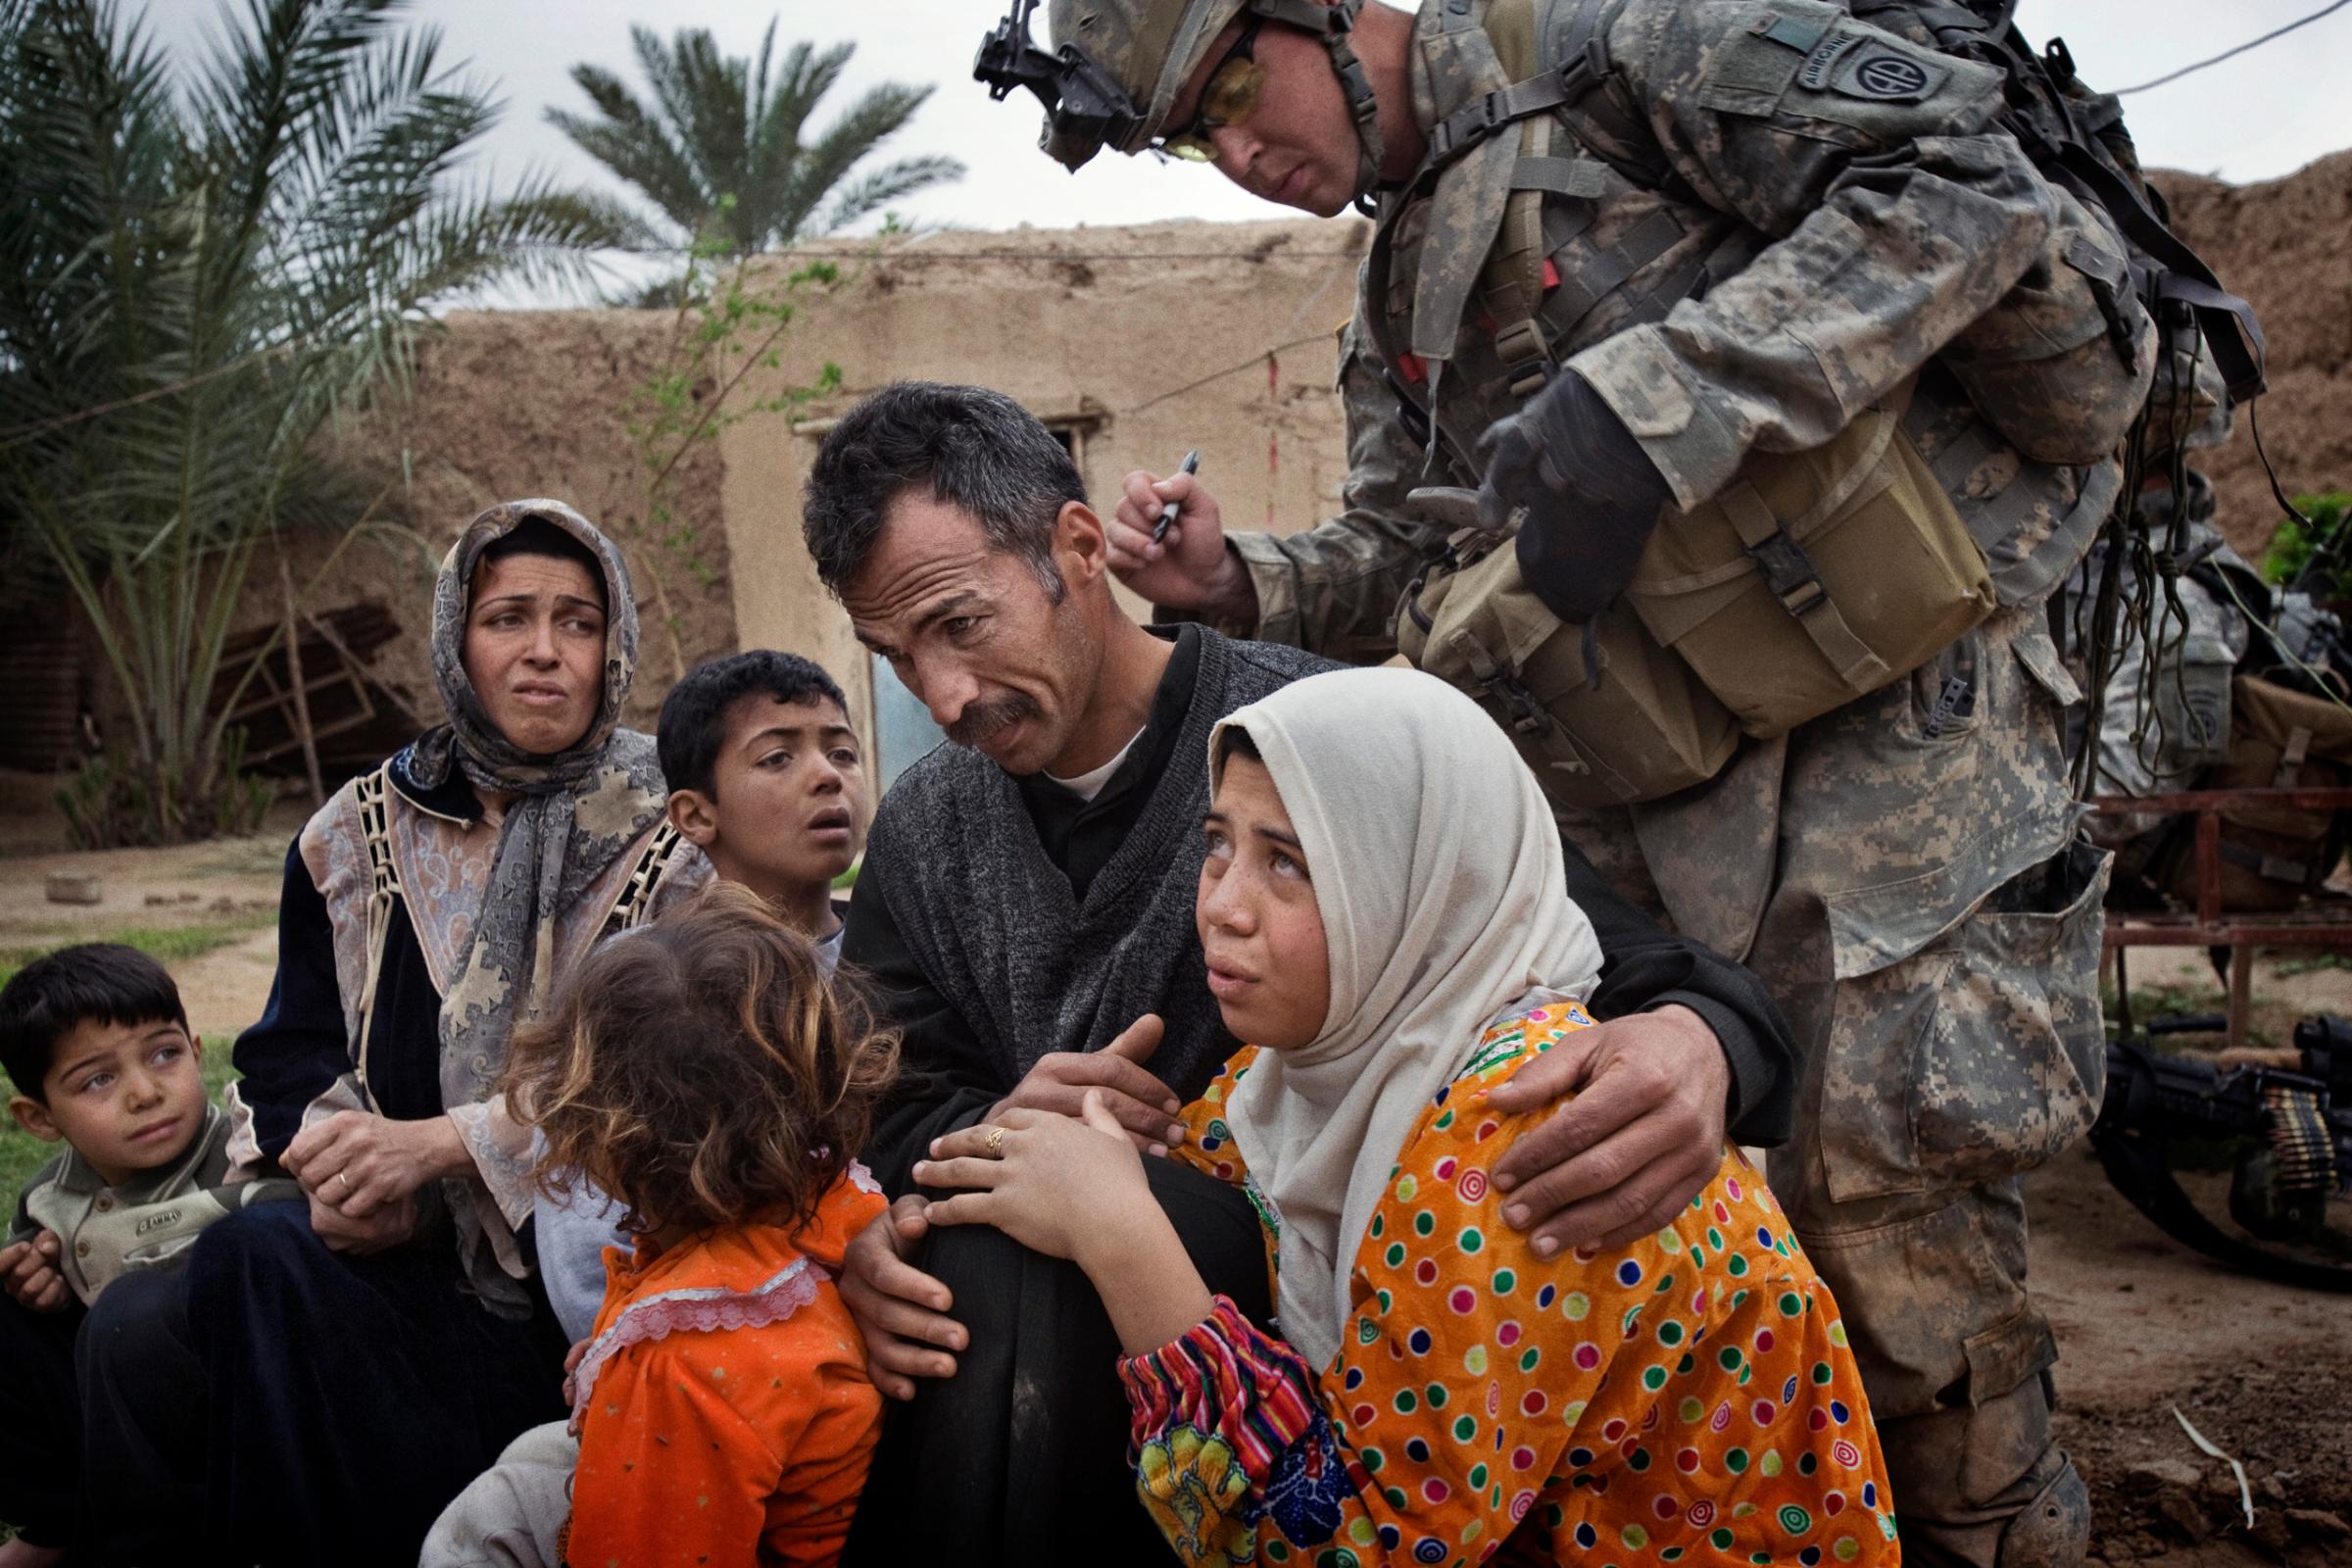 A U.S. soldier marks the neck of a man with identifying numbers. The numbering system allowed U.S. troops to tell whether anyone was moving about the village, despite a lockdown, Qubah, Iraq, March 24, 2007.